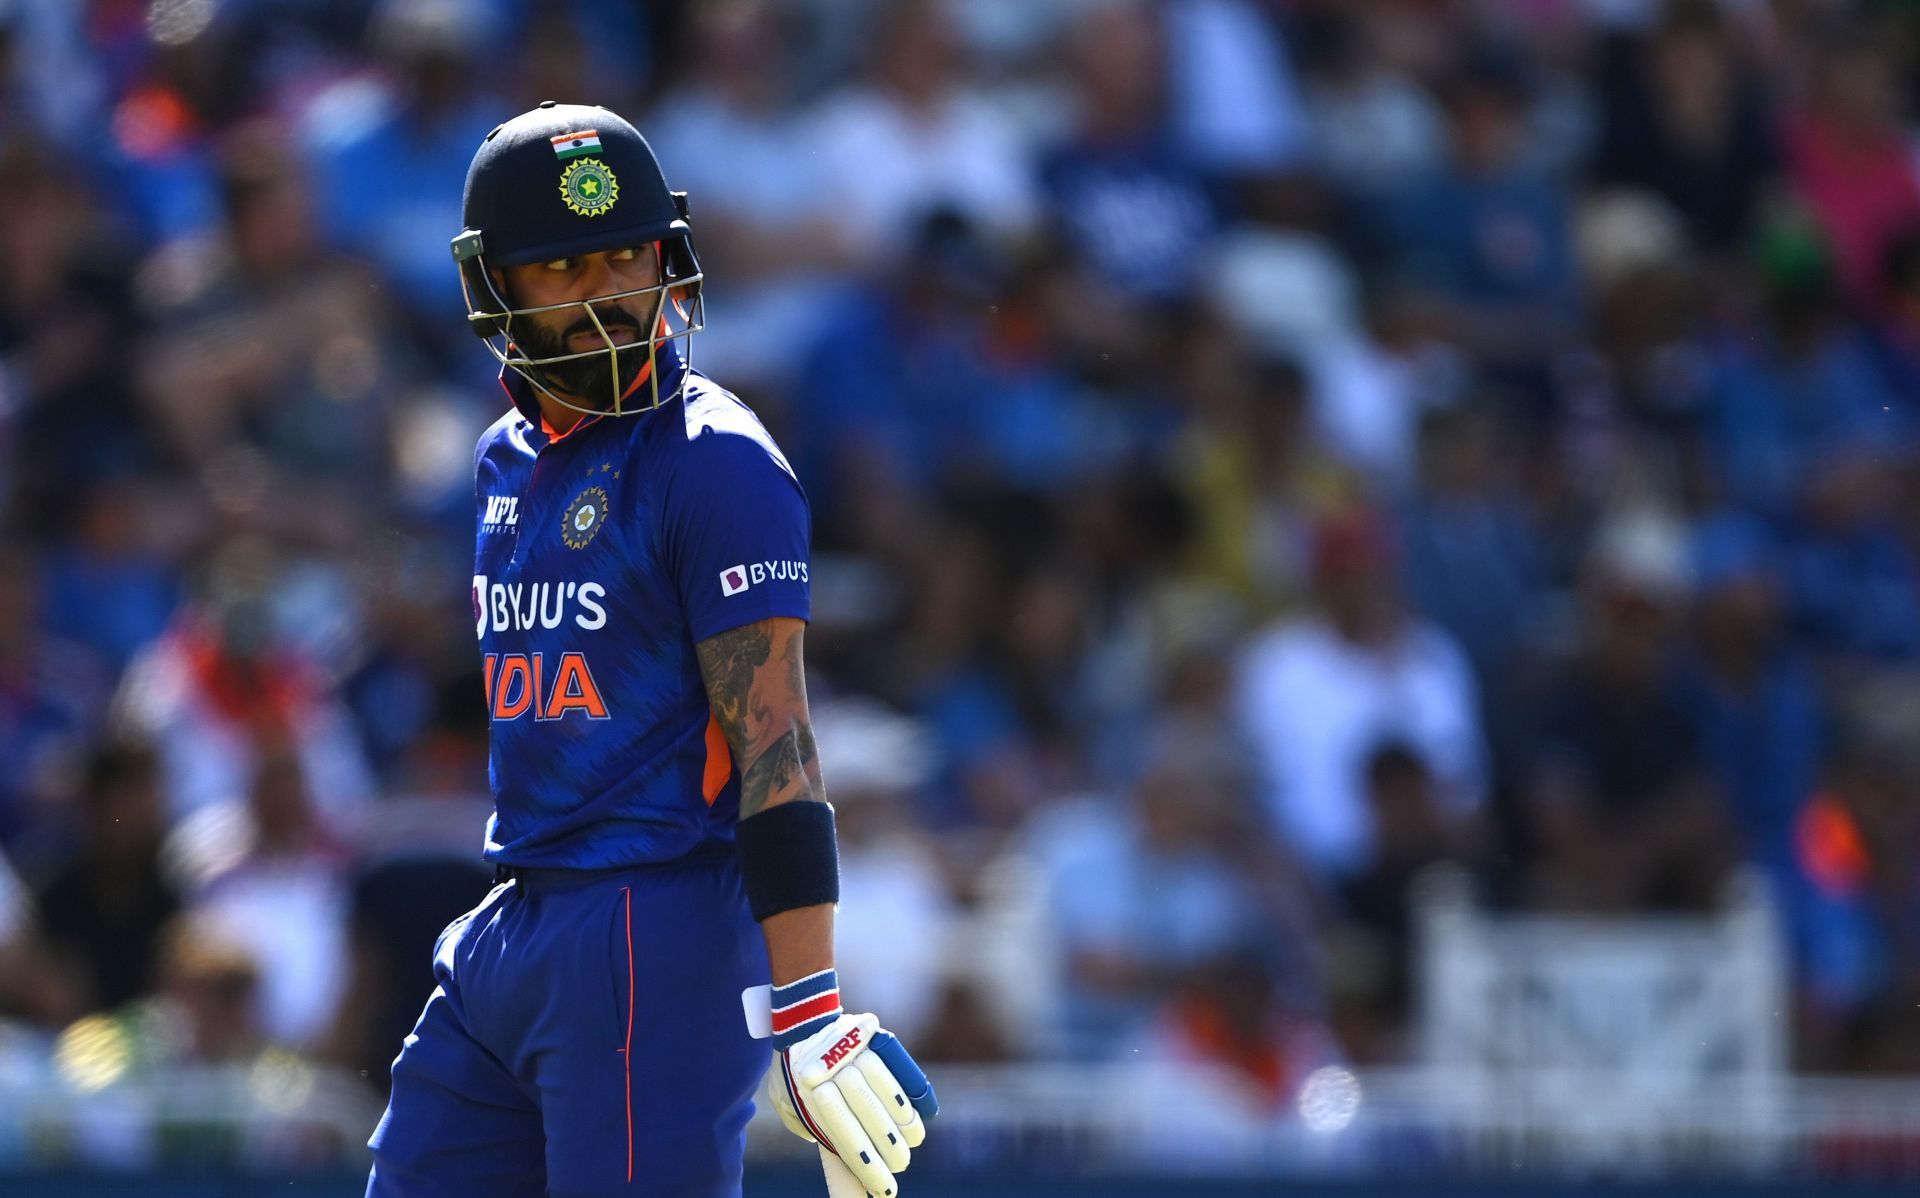 Virat Kohli is likely to miss the first ODI against England due to a groin injury.